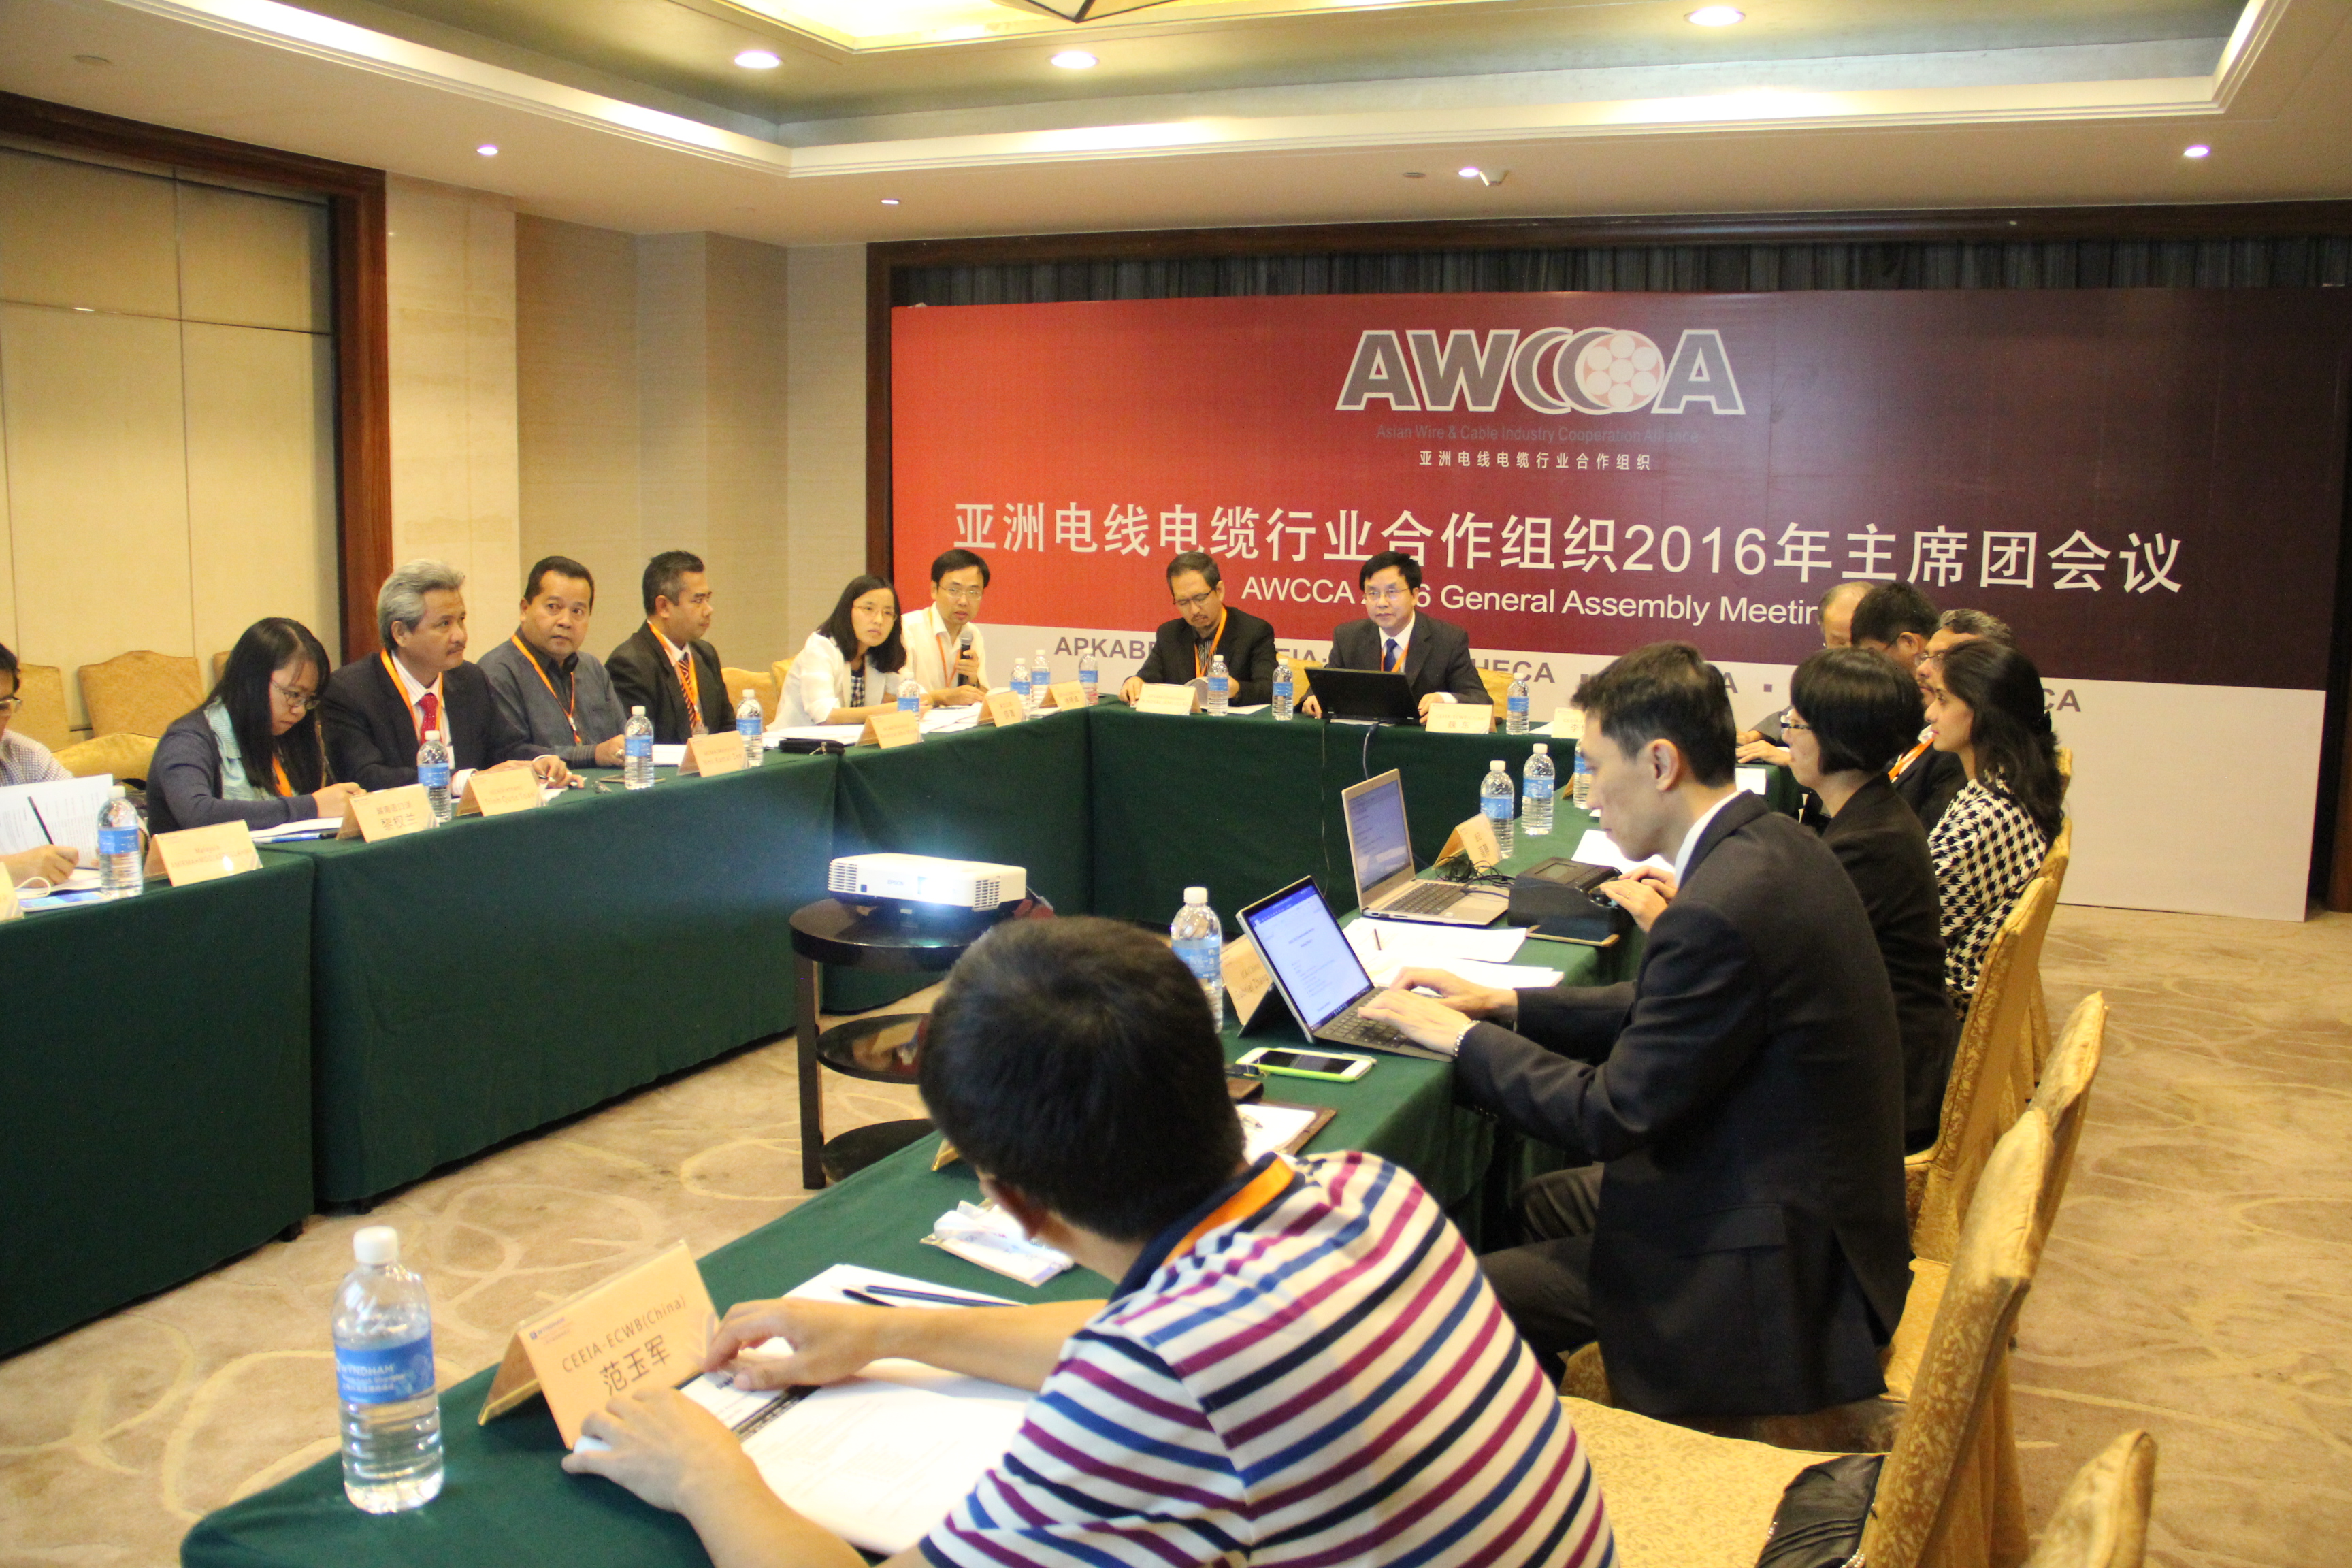 1. AWCCA 2016 General Assembly Meeting.JPG